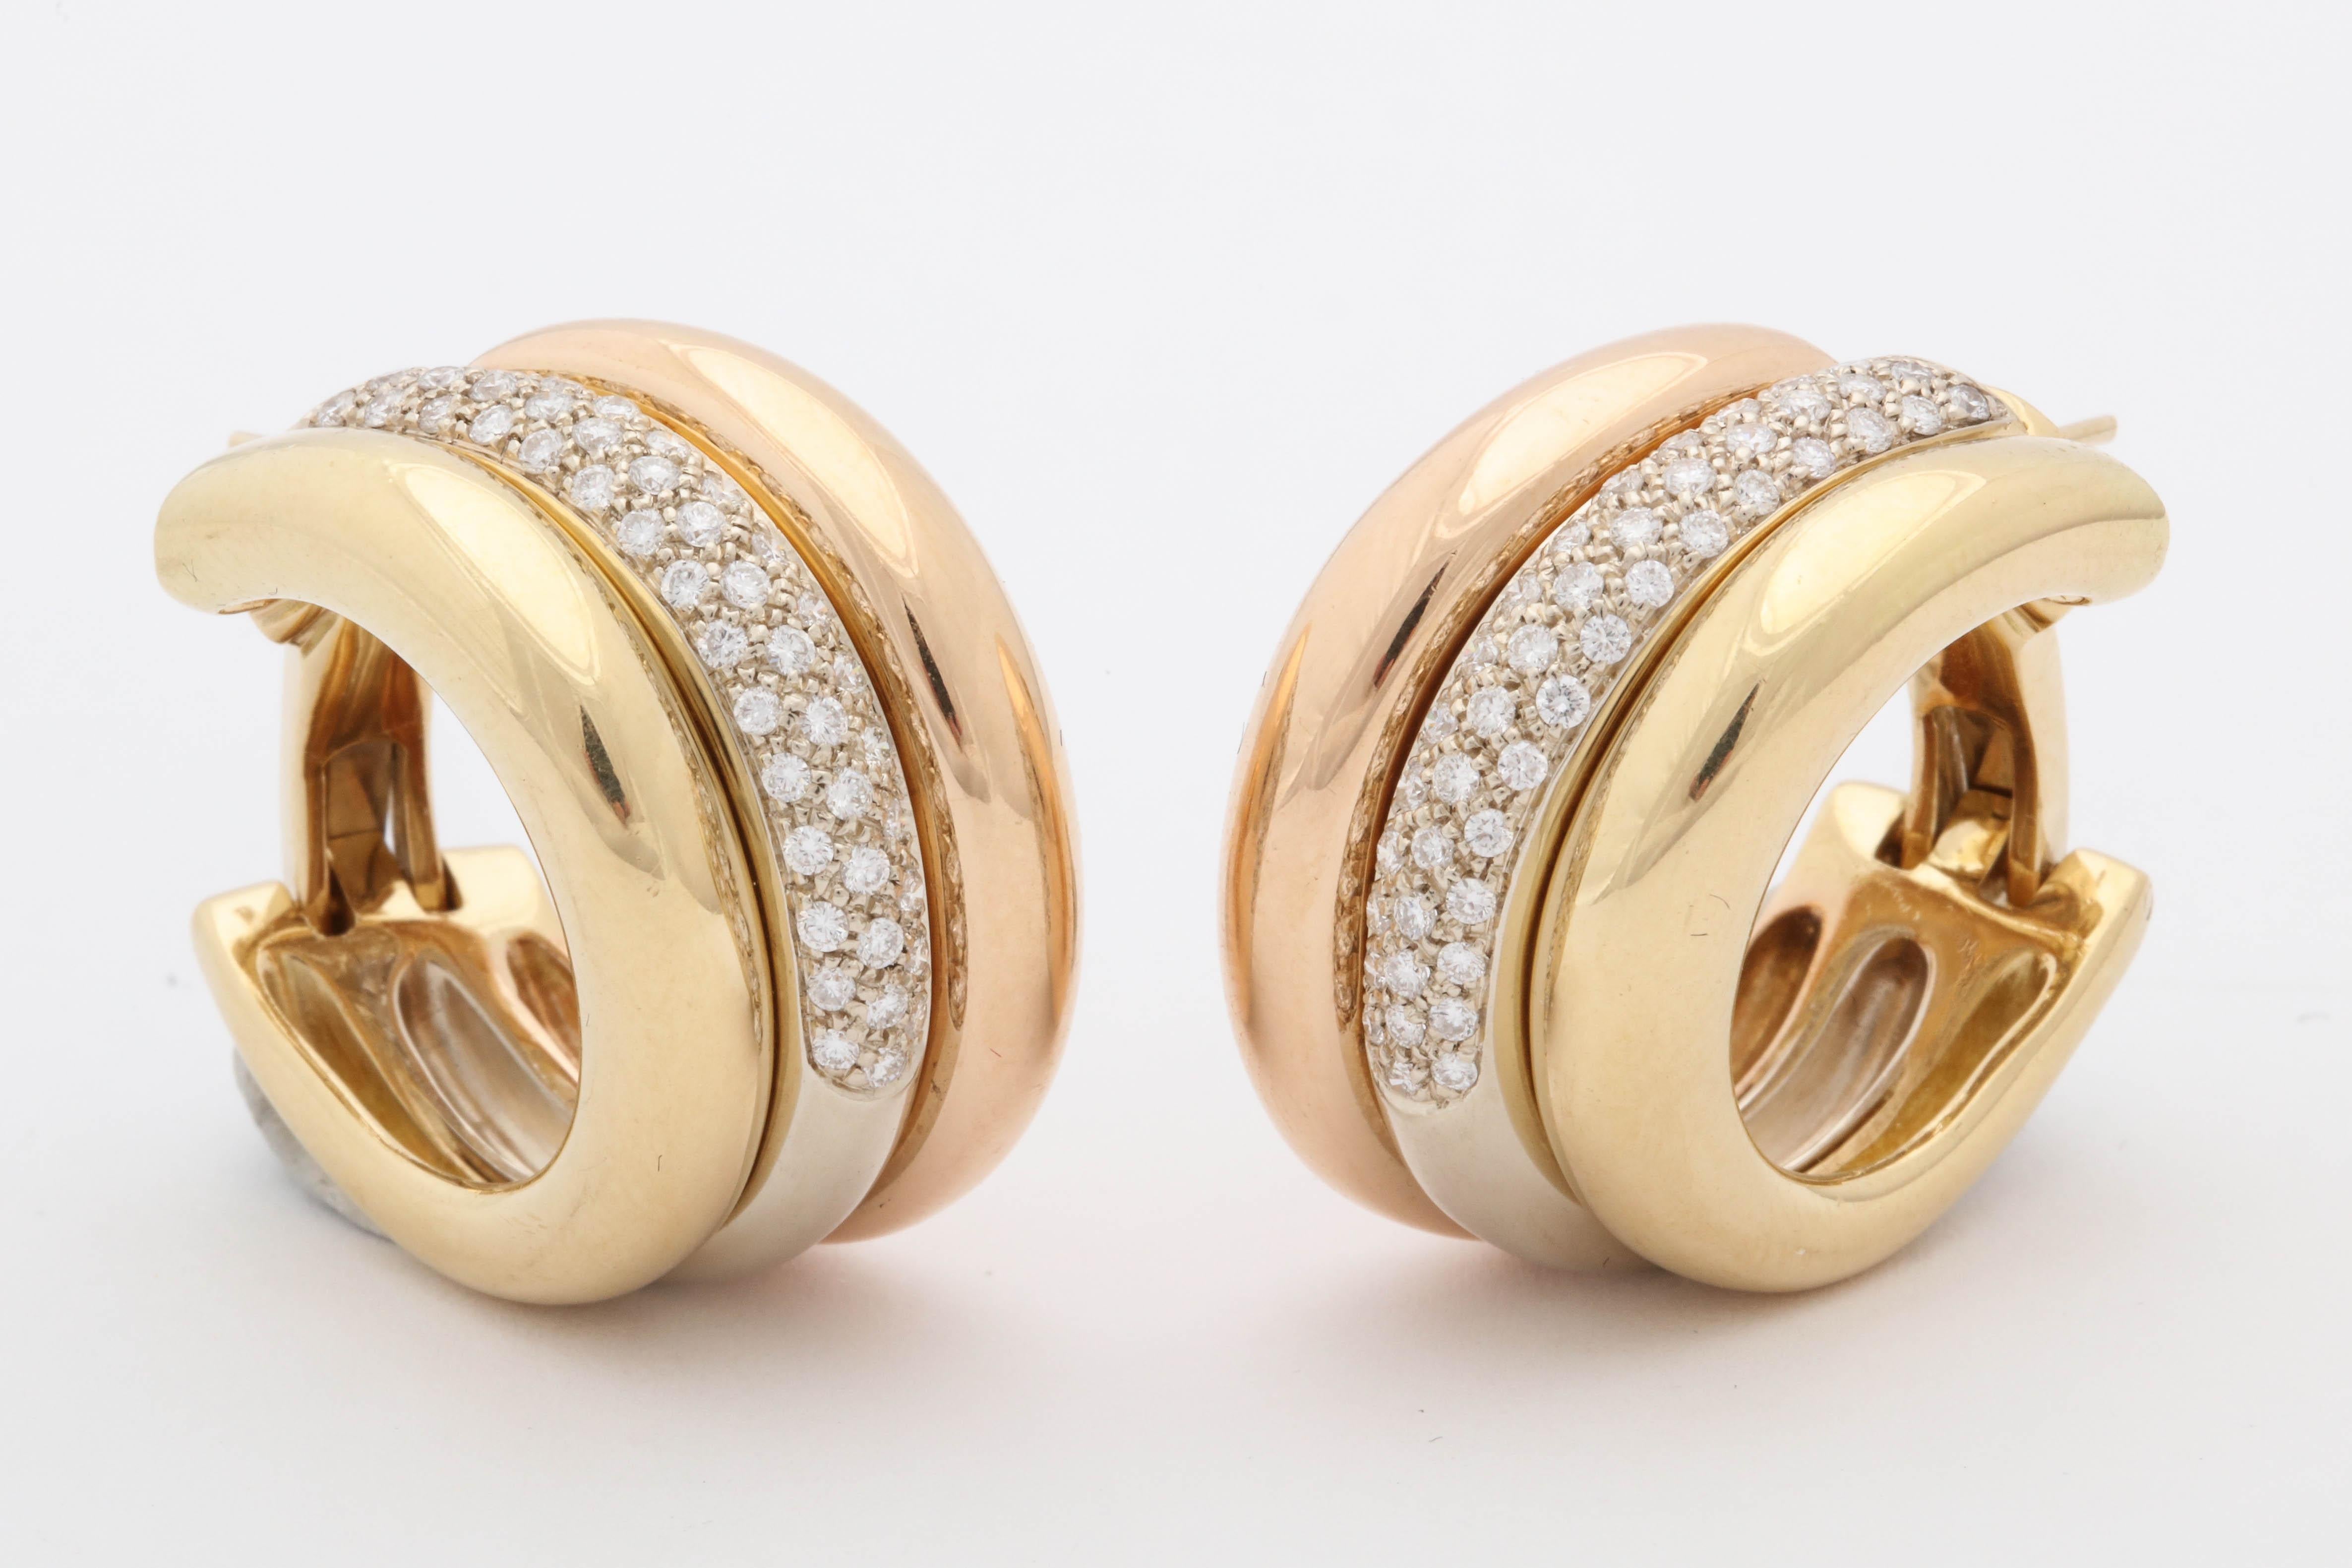 One Pair Of Ladies Tri Color 18kt Gold Earrings Made With Pink ,Yellow And White Gold Half Hoop Design Loops Embellished With Numerous High Quality Full Cut Diamonds Weighing Approximately 3 Carats Total Weight. Designed By Cartier Made In France In